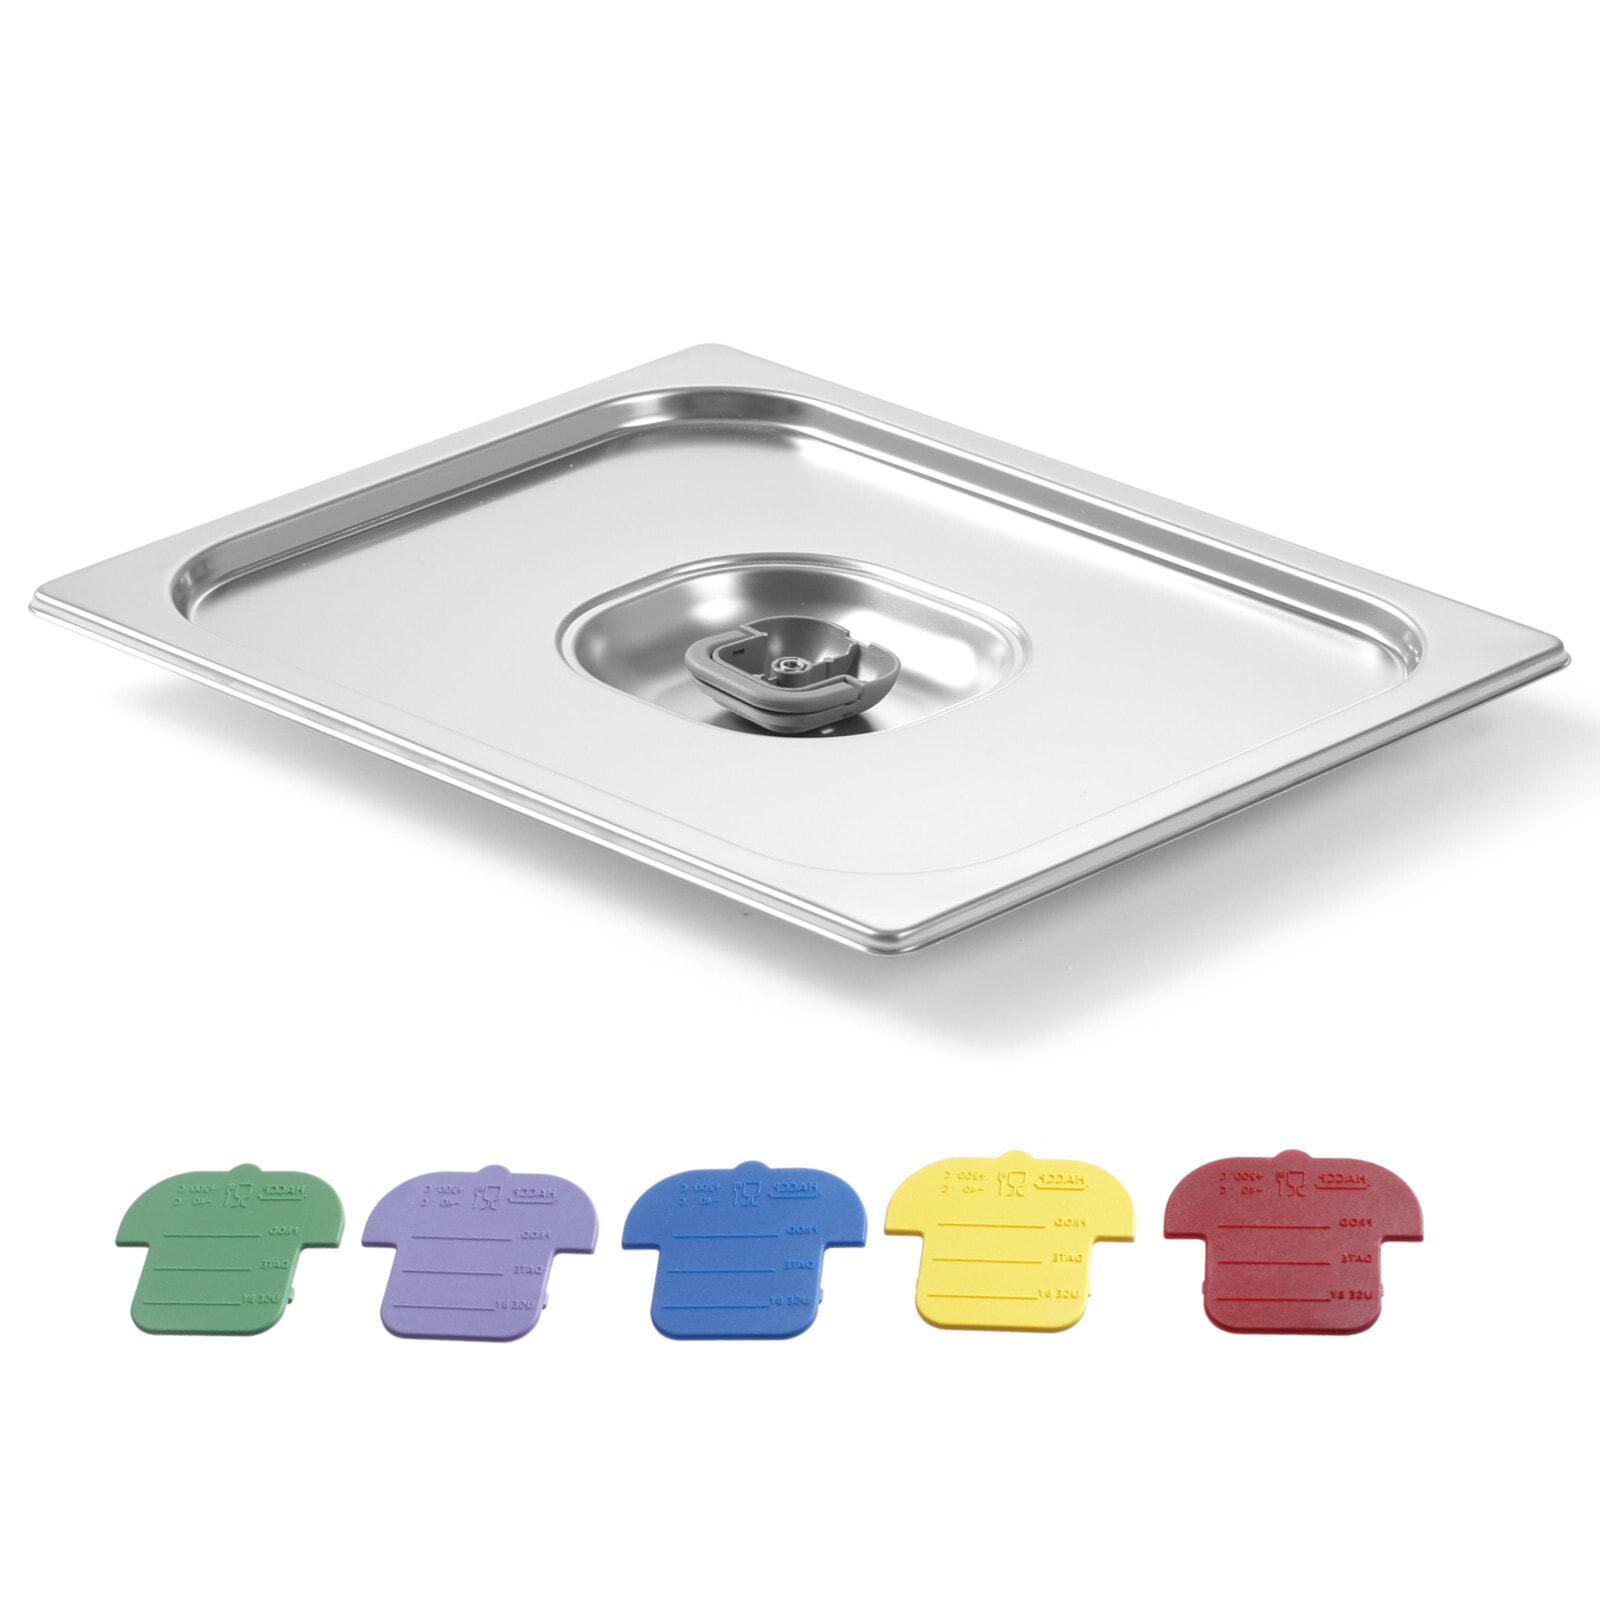 The lid for the GN container with colored Haccp clips GN2 / 3 354x325mm stainless steel - Hendi 805213